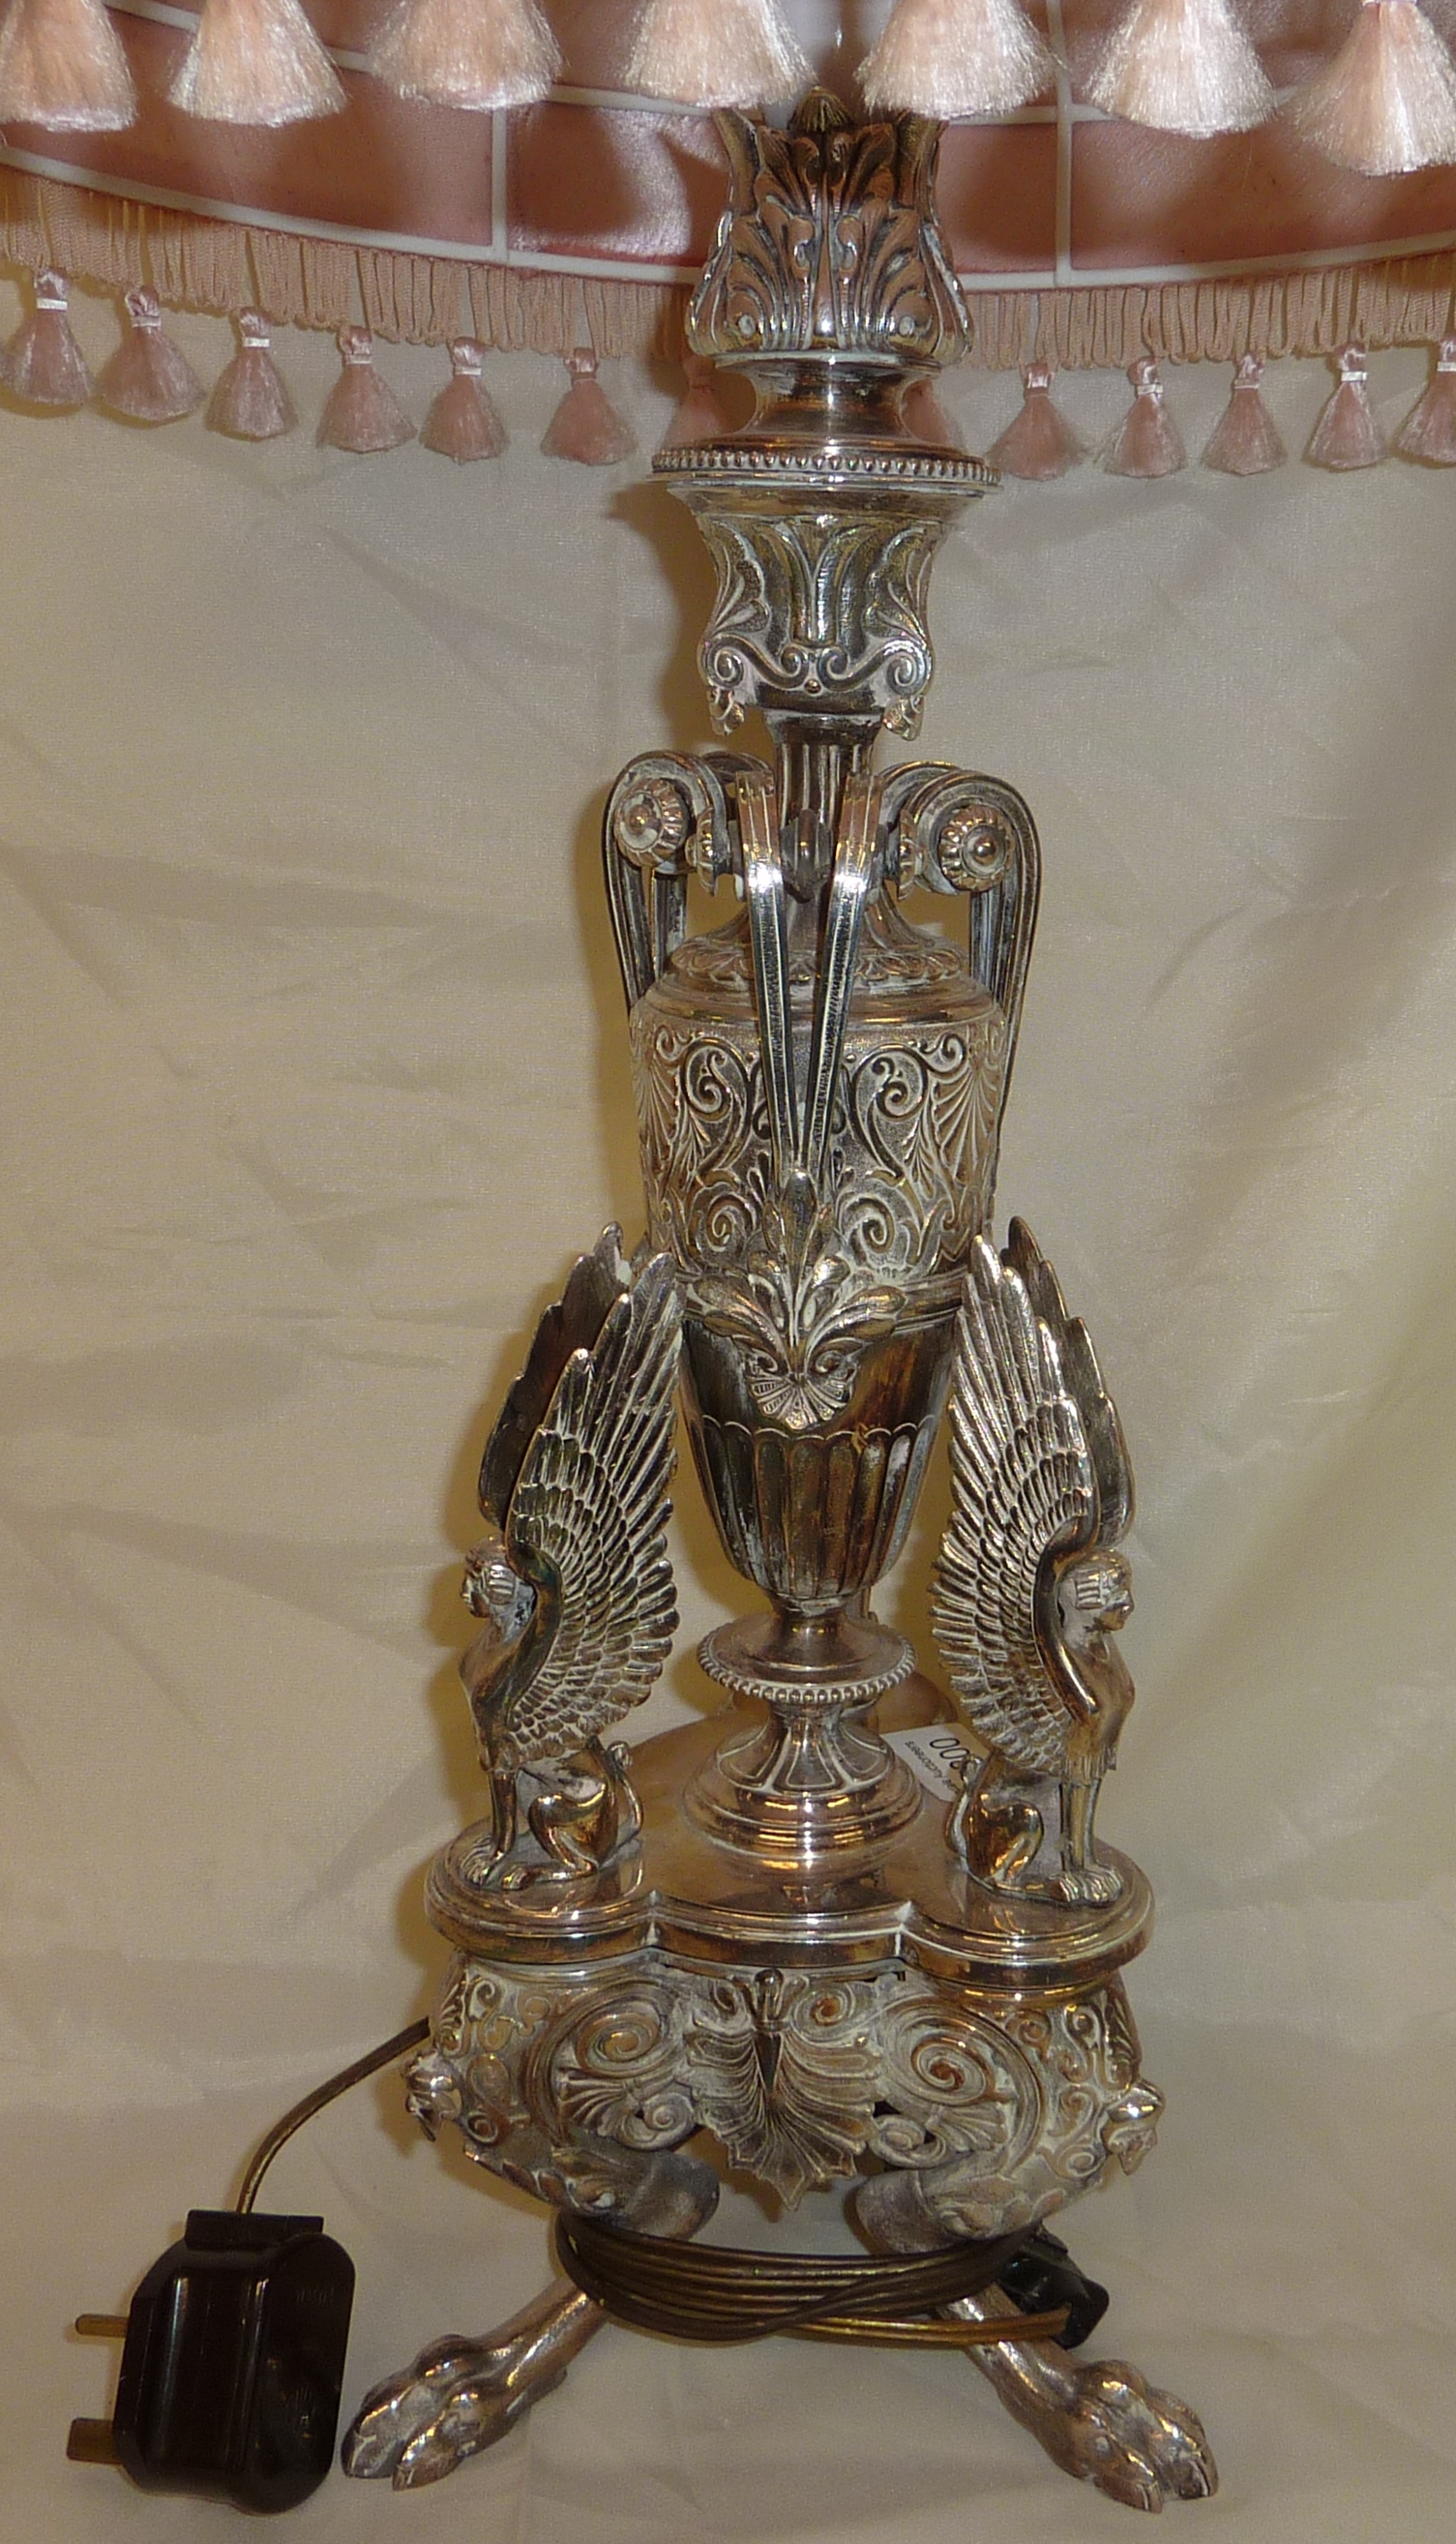 Impressive 19th C Empire style silver plated candlestick (converted to electric) the central column - Image 2 of 2